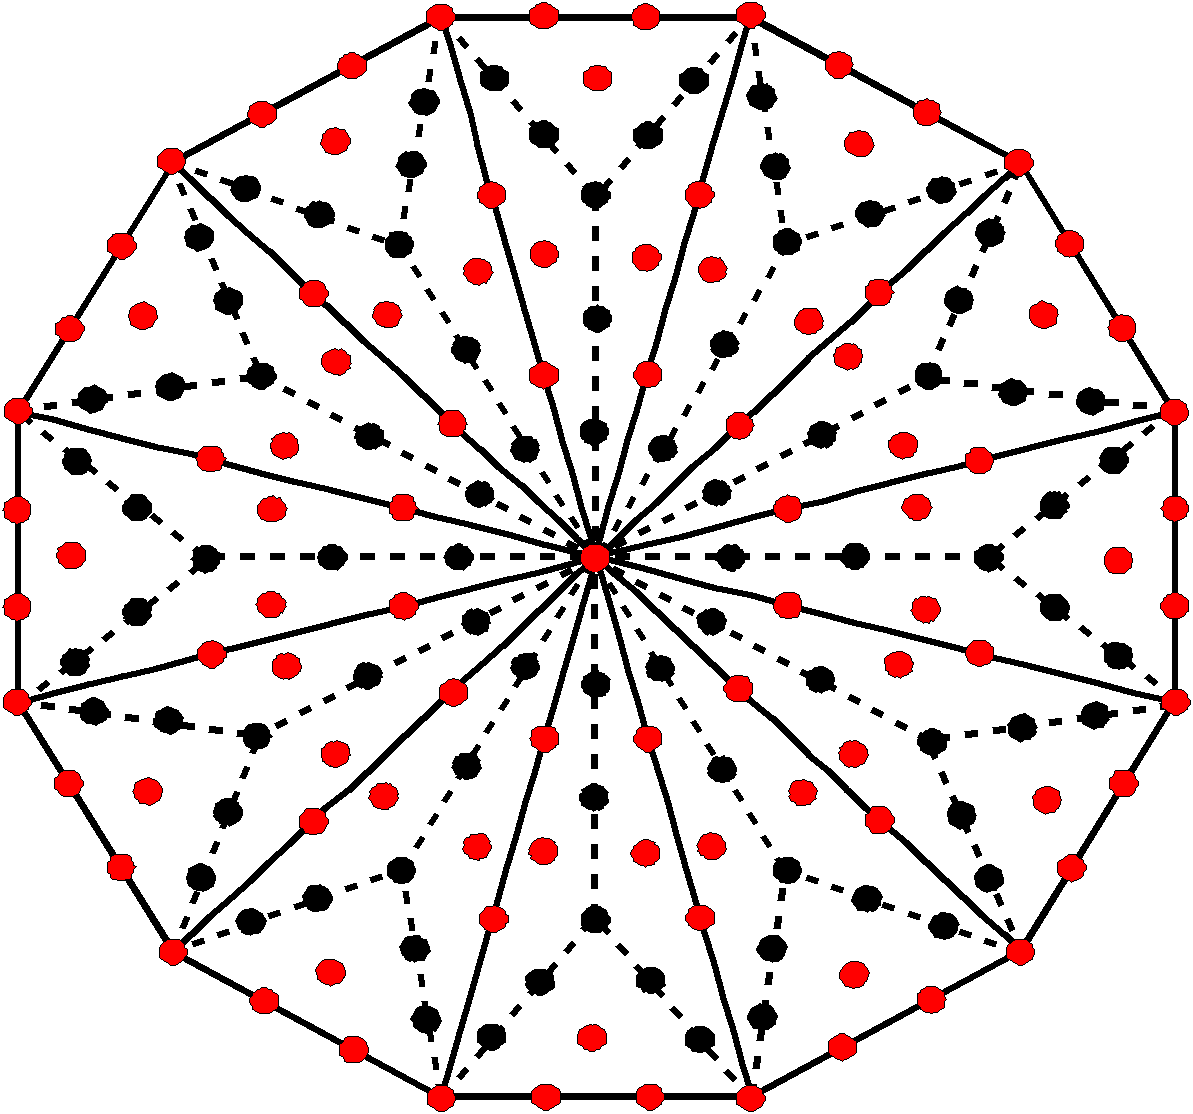 97 yods in Type B dodecagon